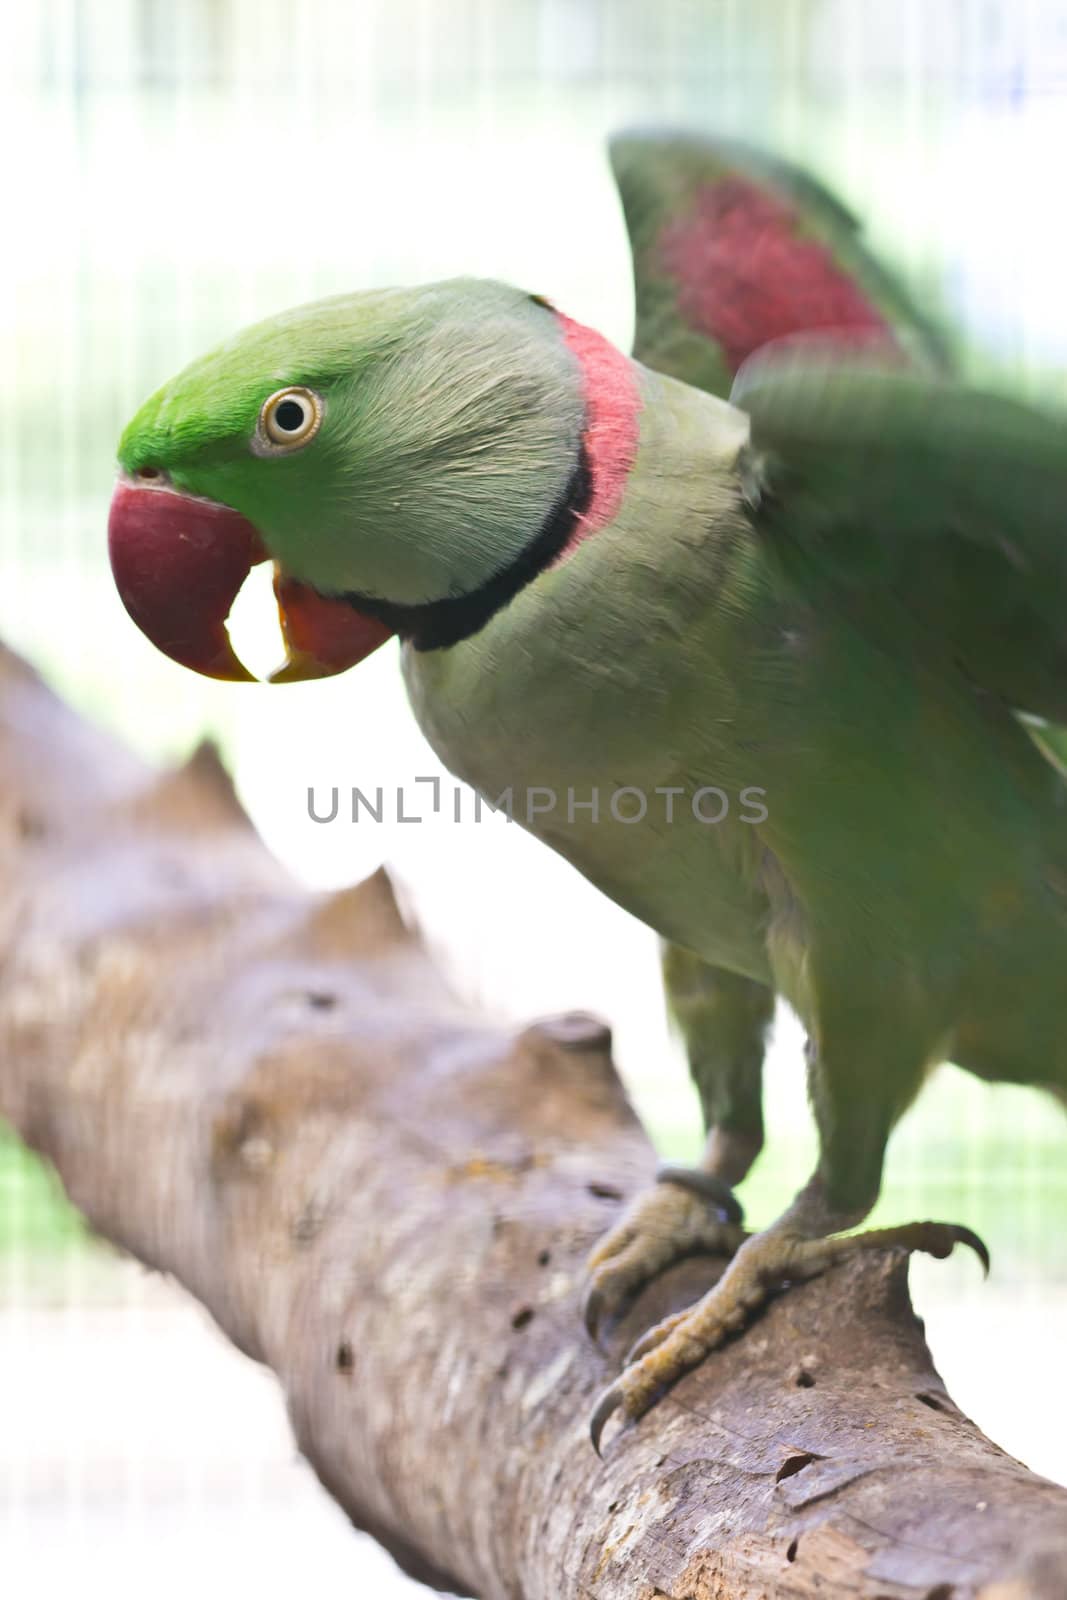 ring necked parrot by tungphoto